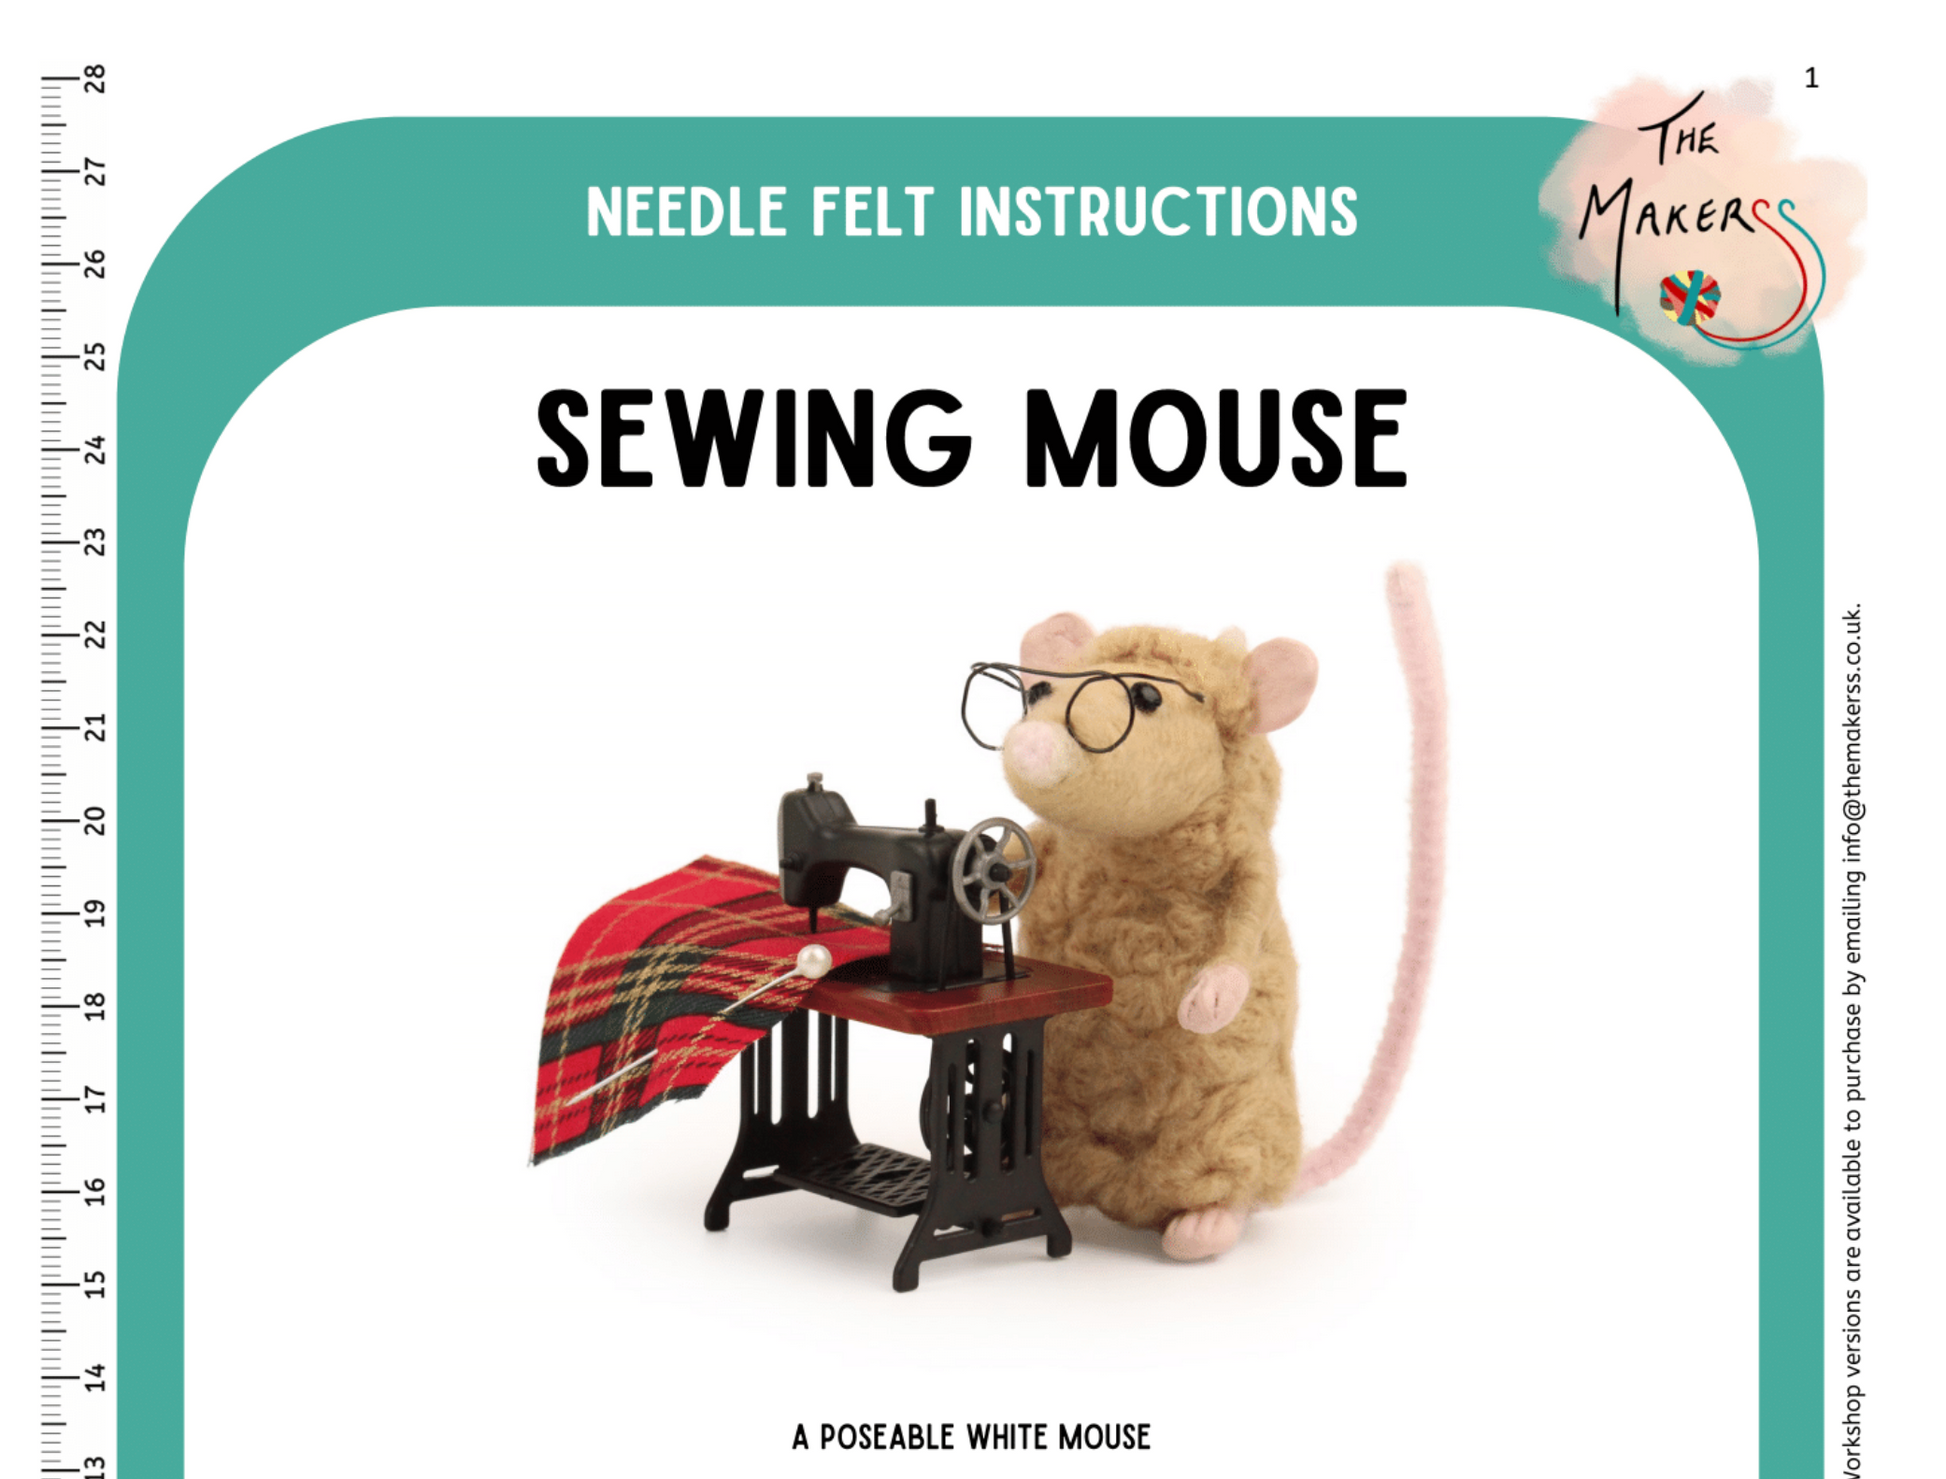 Sewing Mouse Instructions PDF - The Makerss